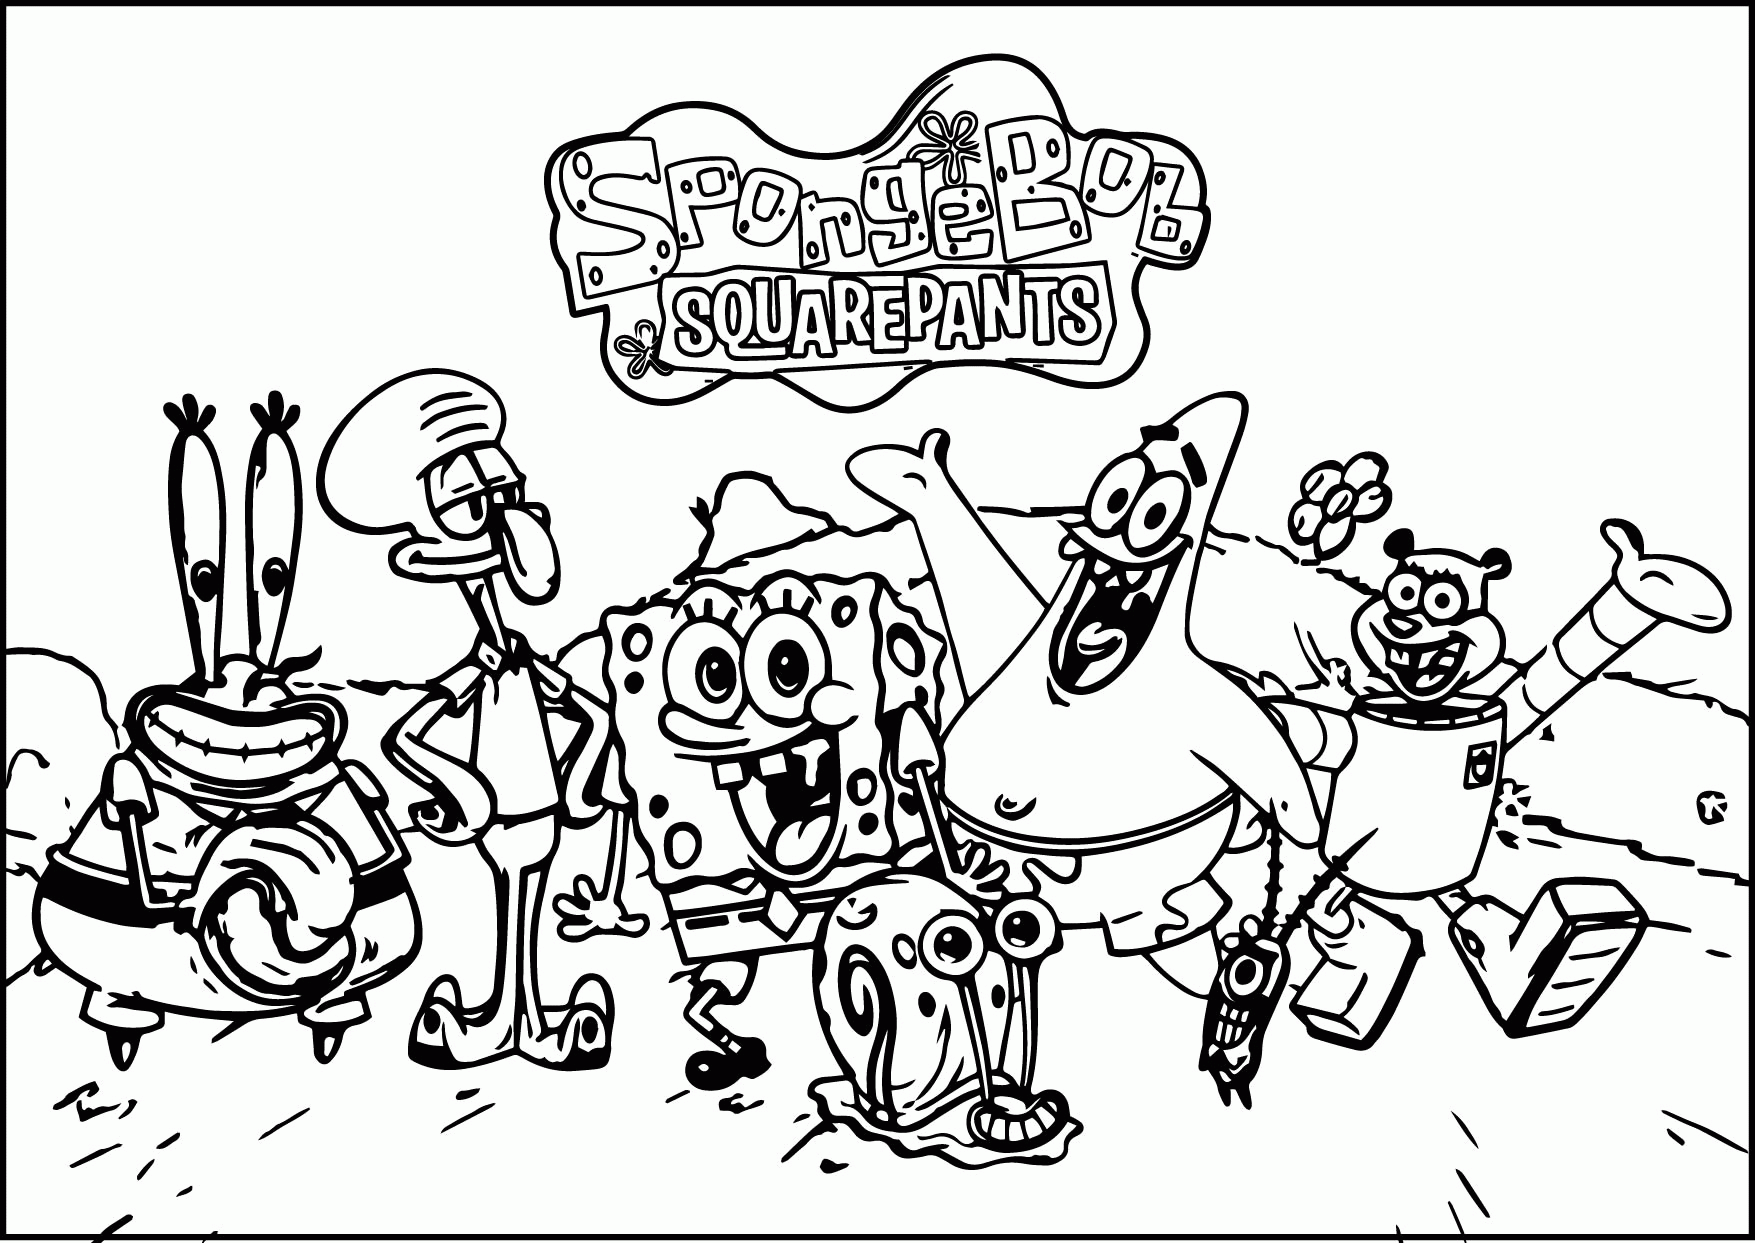 all spongebob characters coloring pages - Clip Art Library